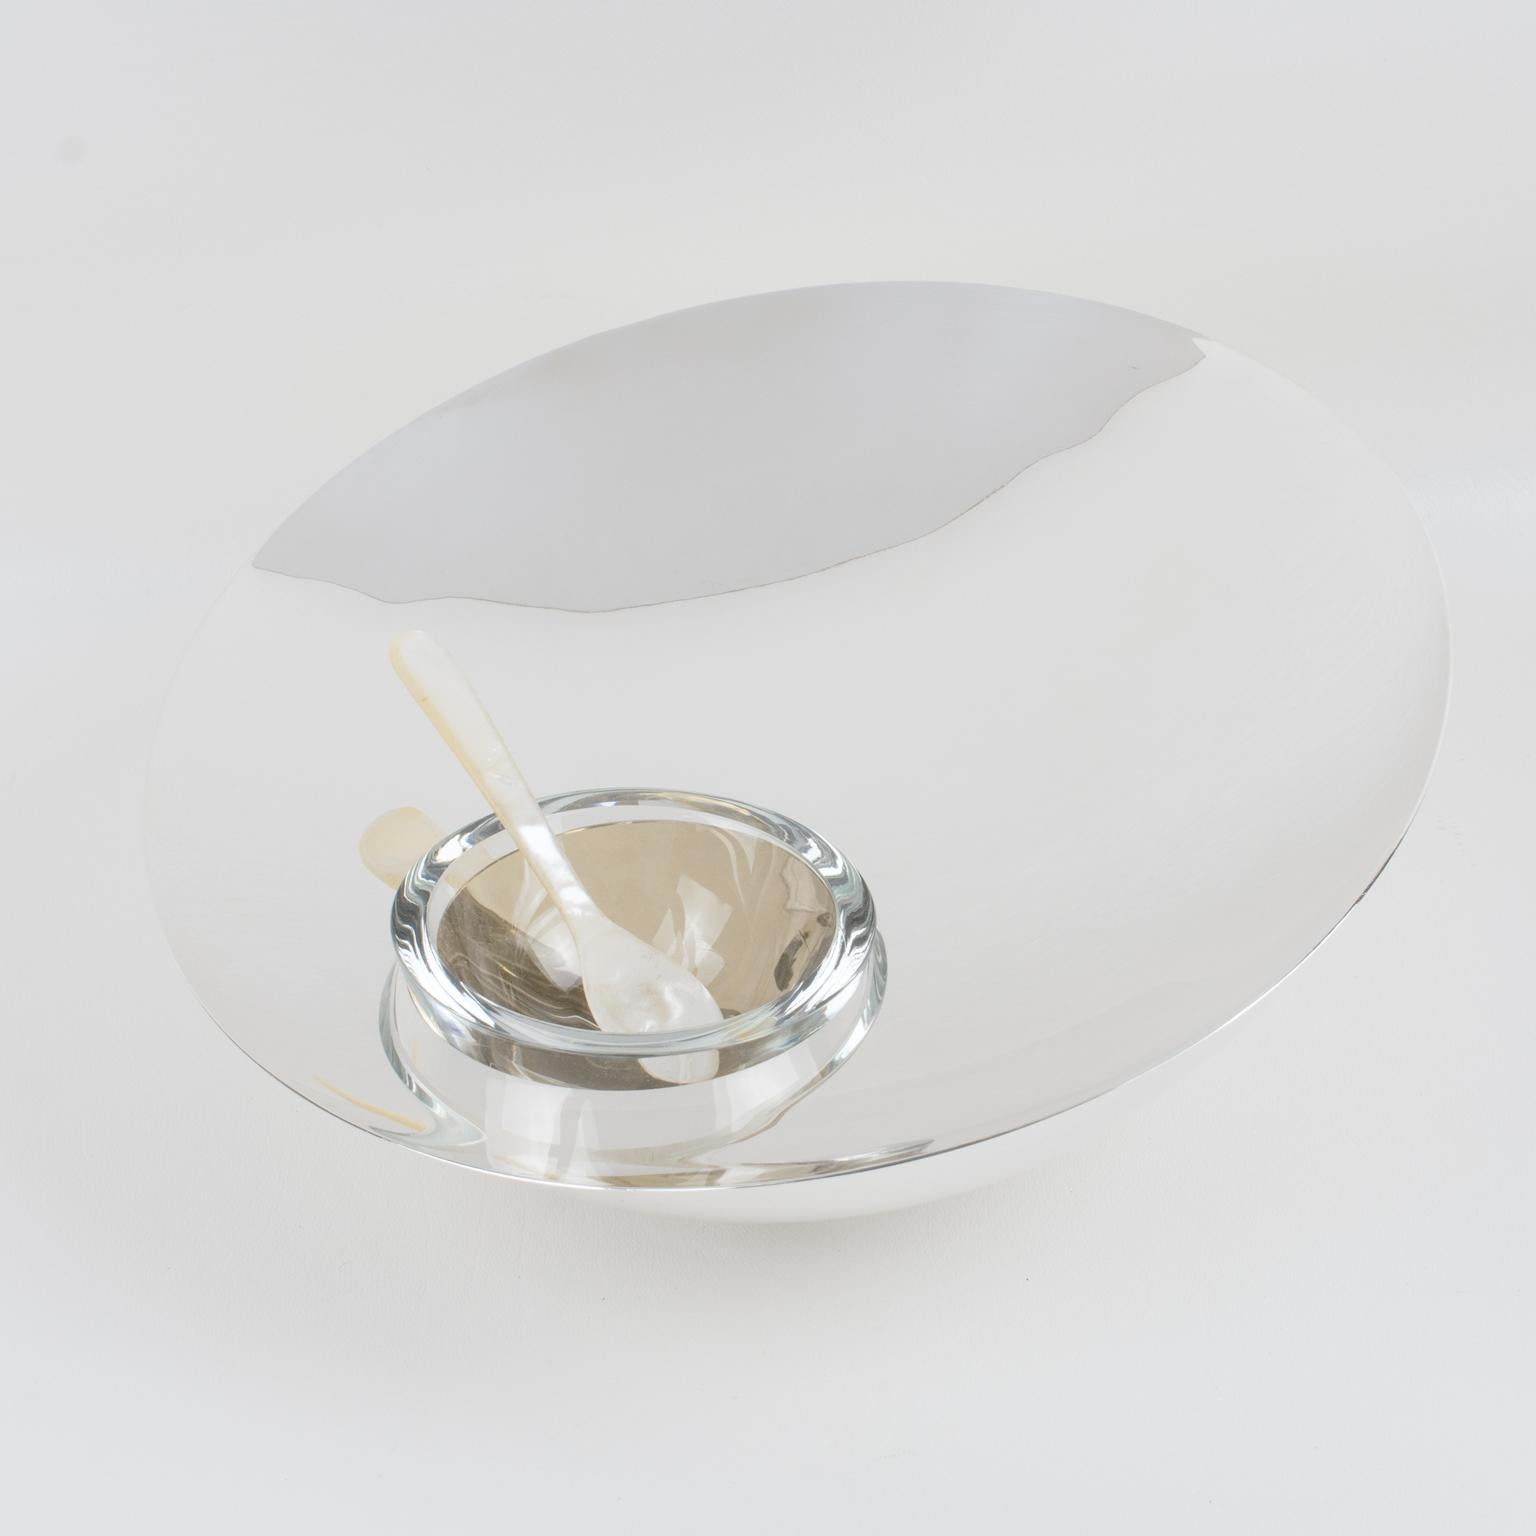 Silver Plate and Crystal Caviar Bowl Dish by Nan Swid for SwidPowell 4